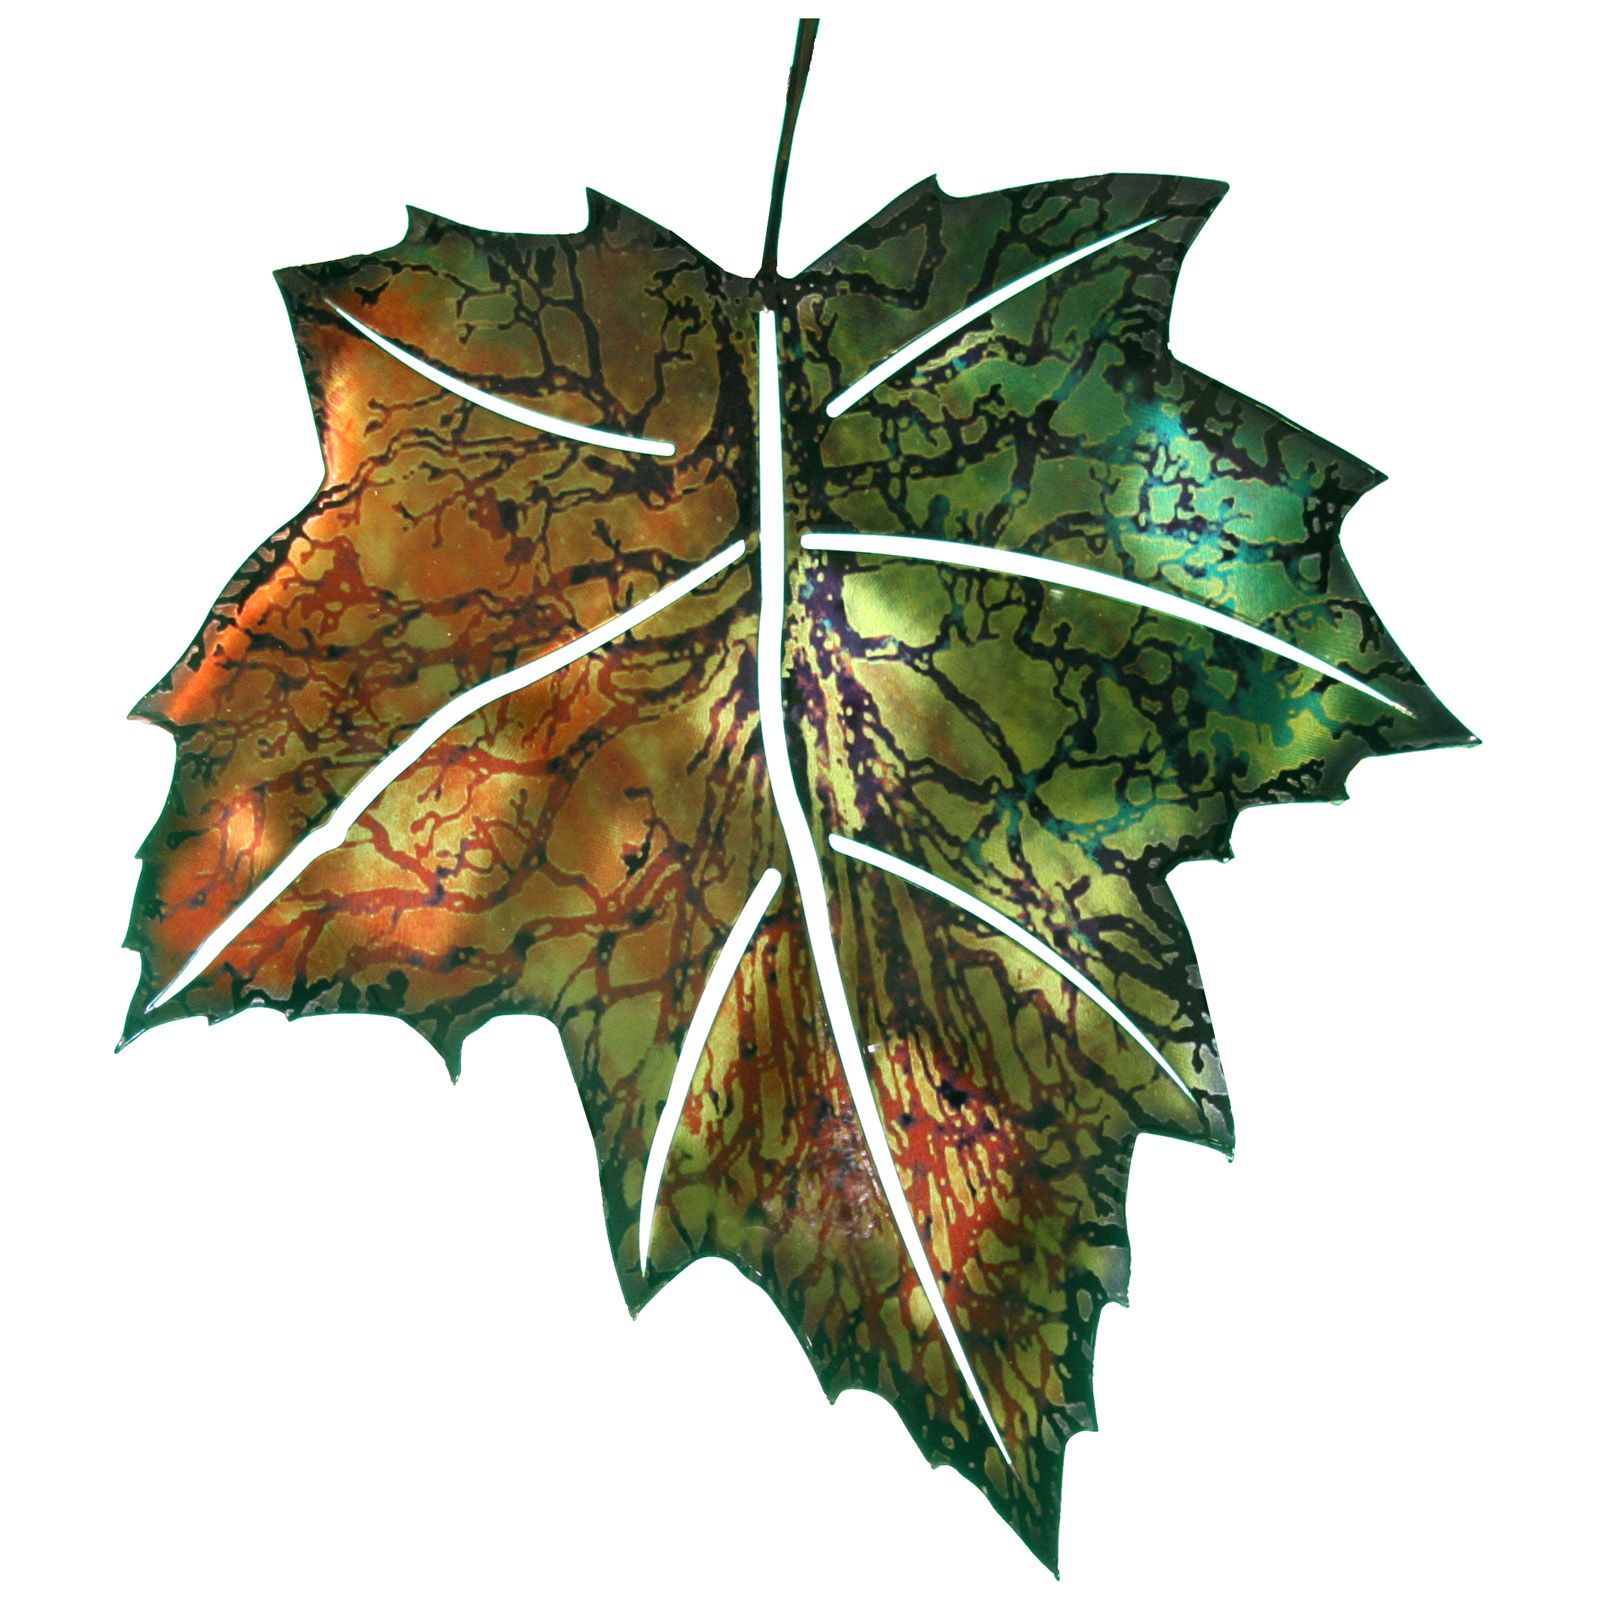 3d Maple Leaf Metal Outdoor Wall Art At Hayneedle Within Most Recent Metallic Leaves Metal Wall Art (View 3 of 20)